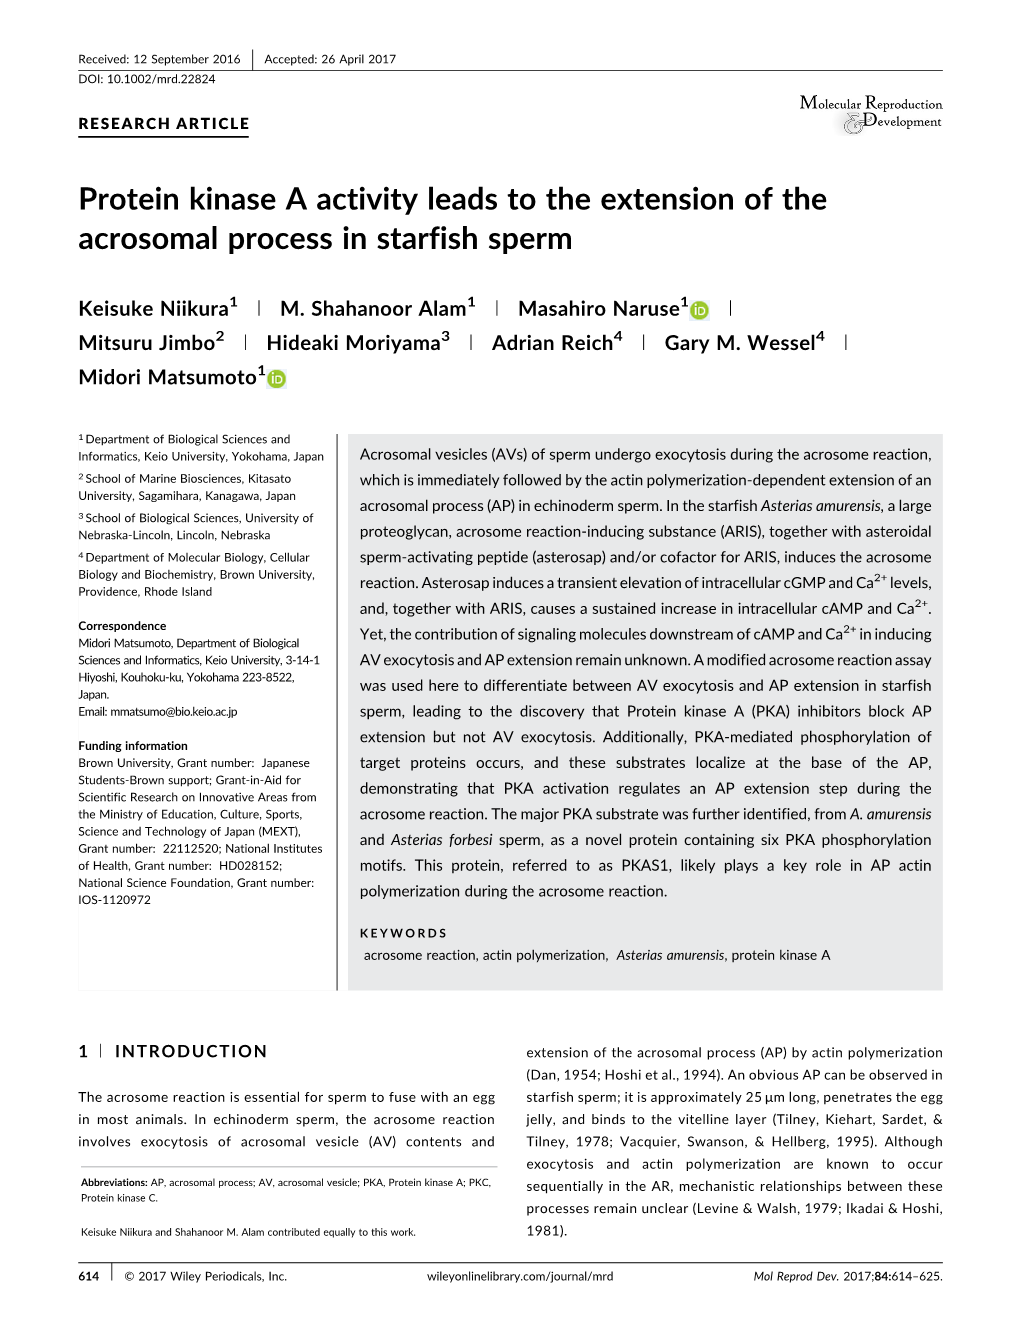 Protein Kinase a Activity Leads to the Extension of the Acrosomal Process in Starfish Sperm